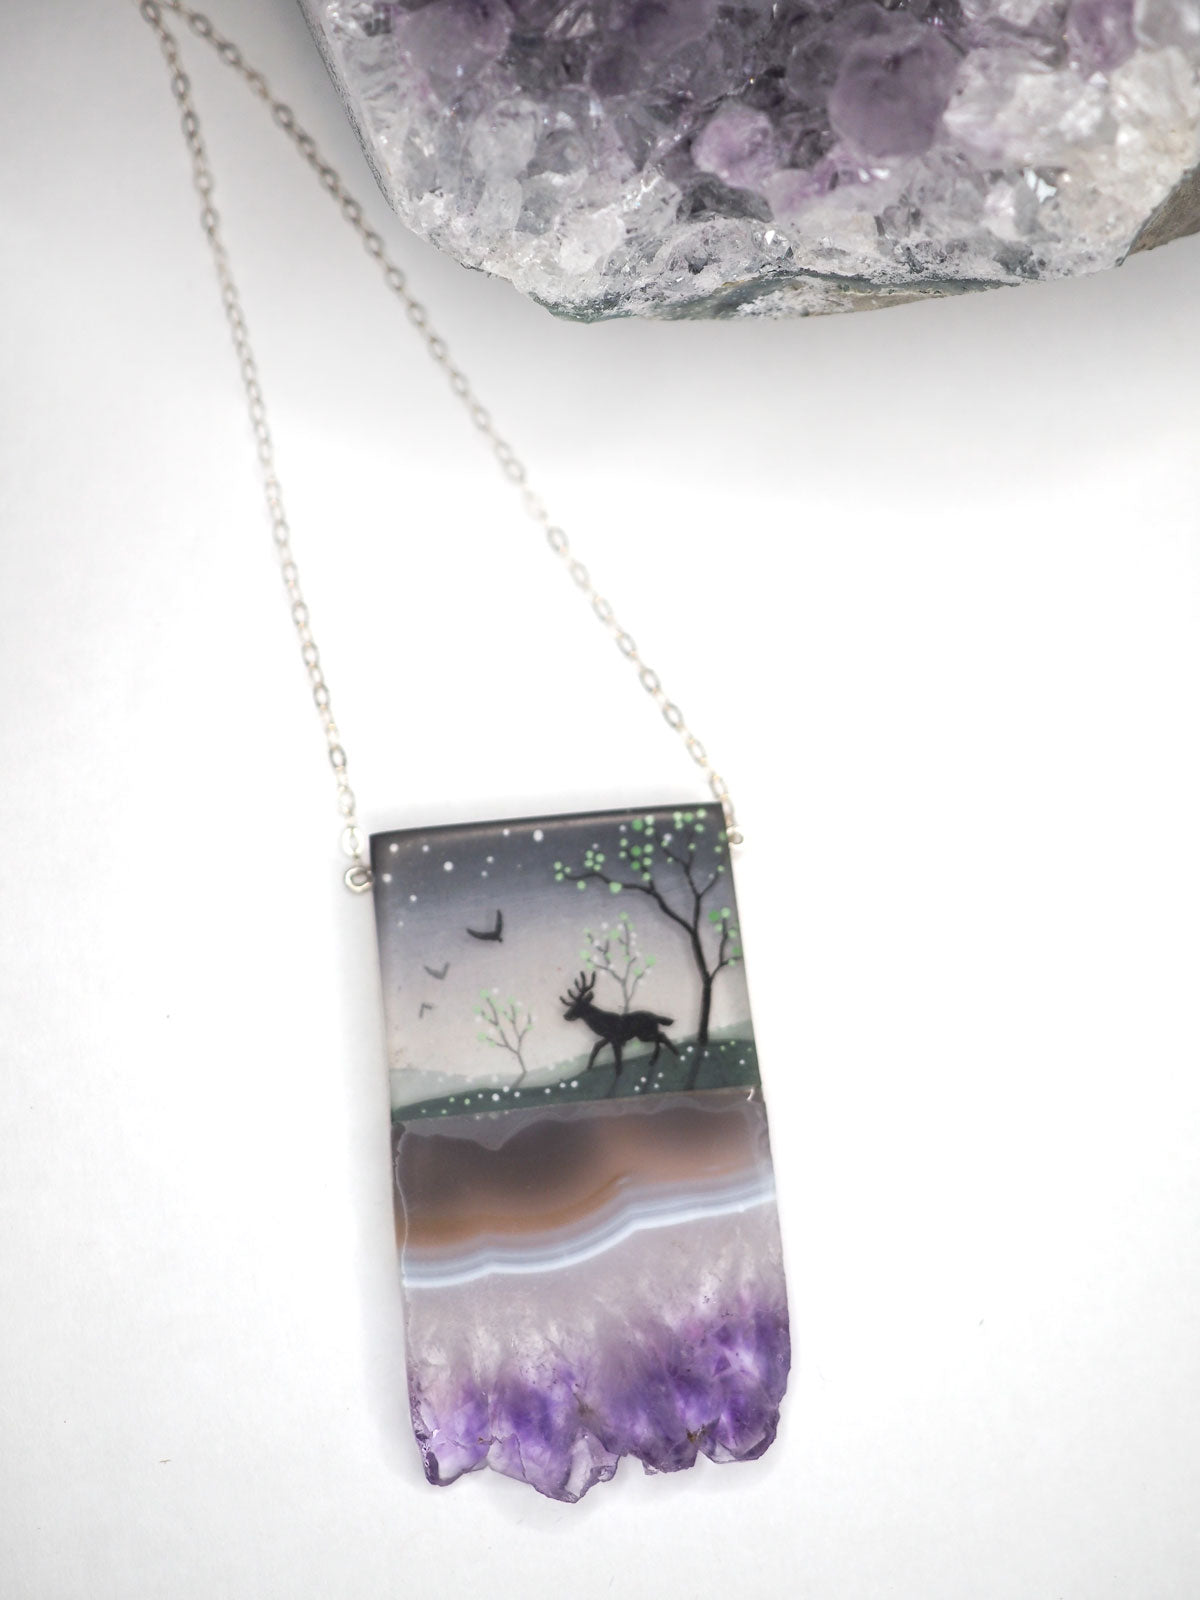 Hand-painted resin and amethyst slice necklace on a silver chain with a bird and deer in a forest scene